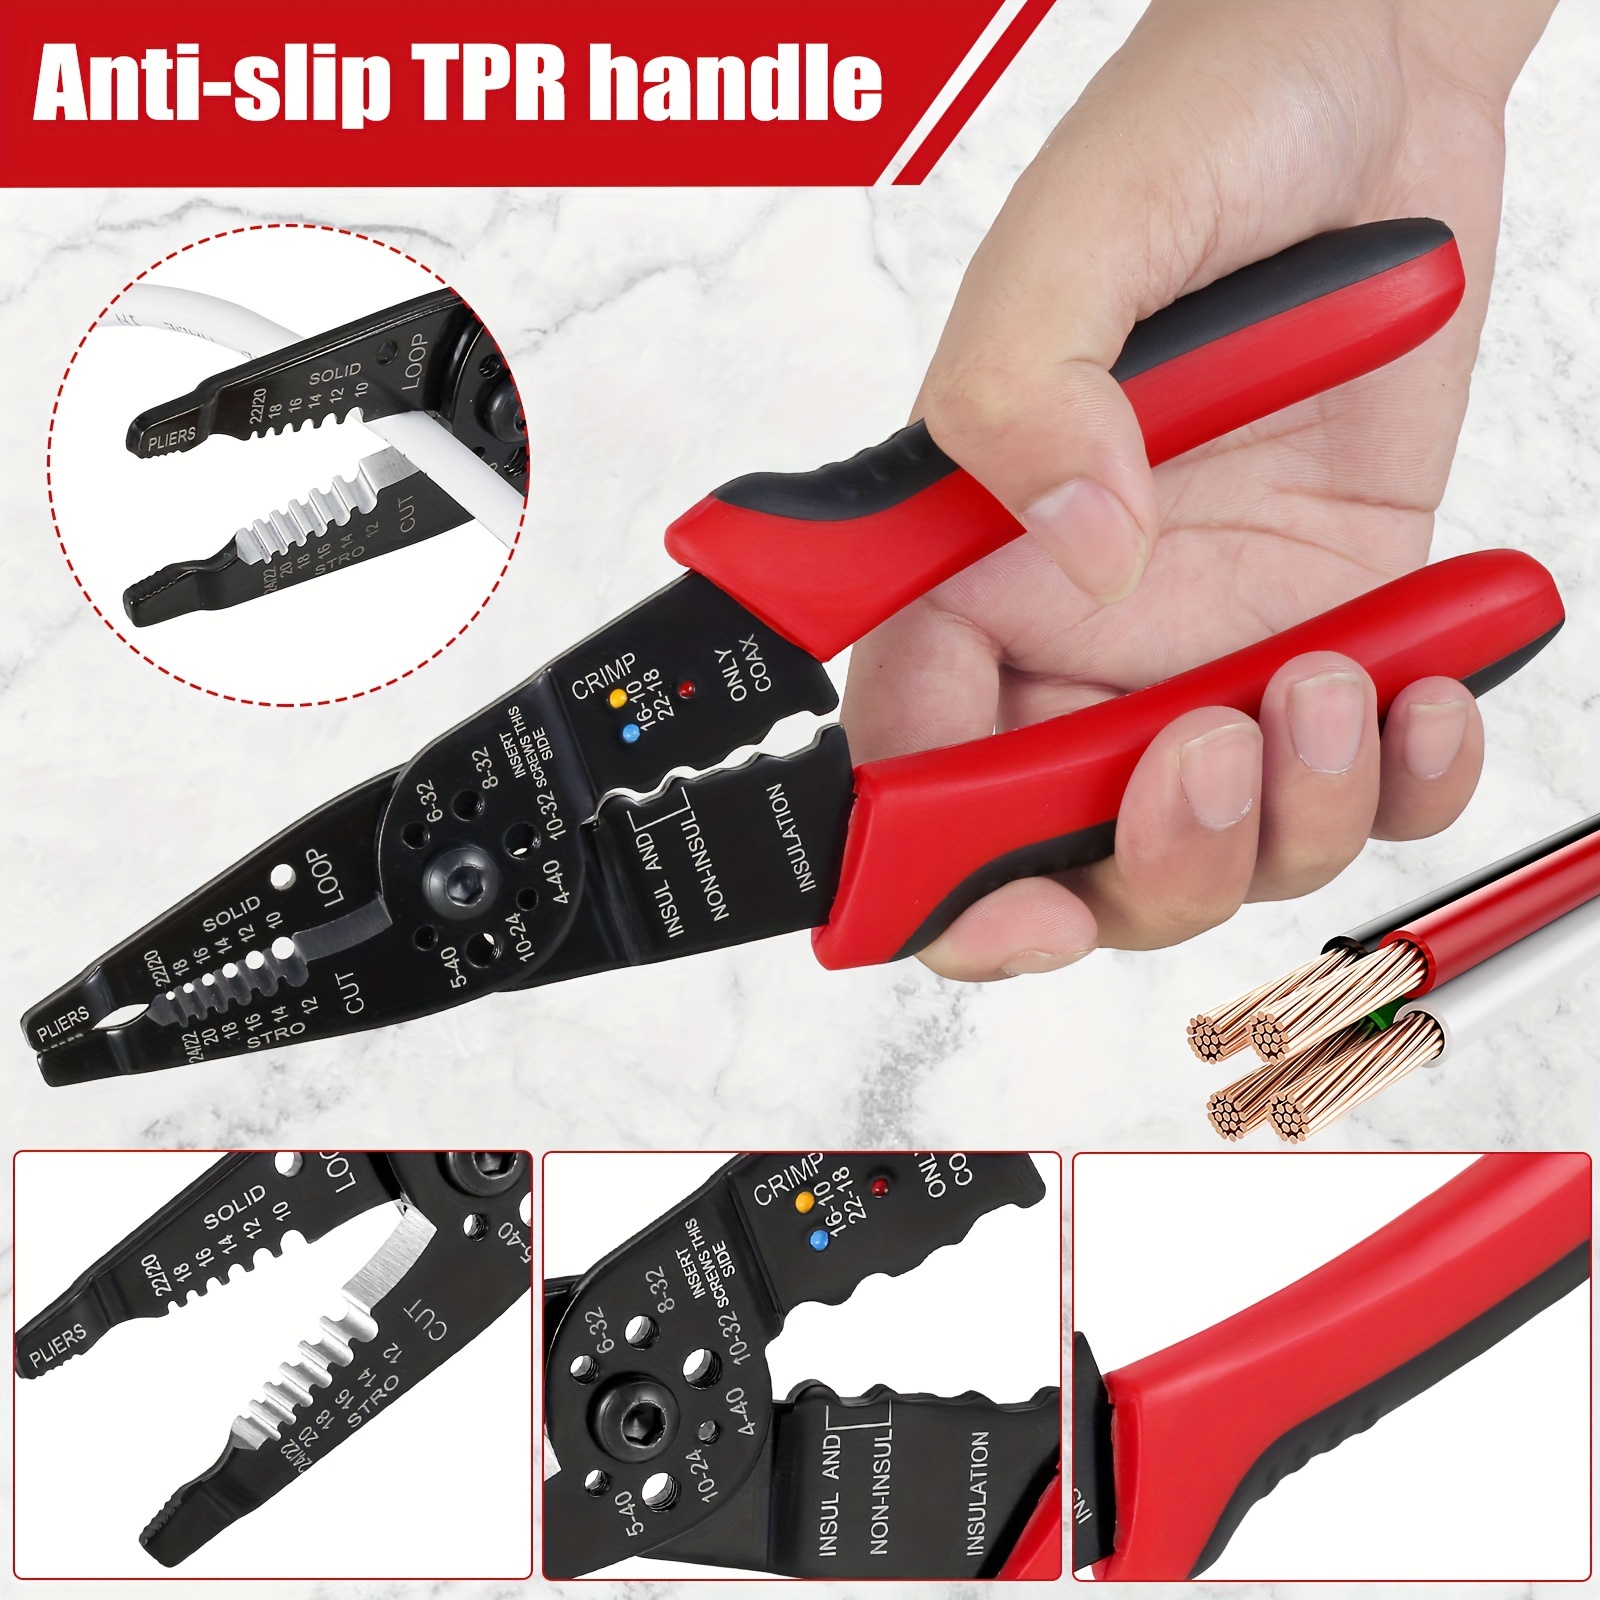 Wire Stripper, Portable Wire Cutter Stripping Tool, Multipurpose Wire  Stripping Tool, Handheld Cable Stripper Crimper Wiring, Electrical Wire  Cutting